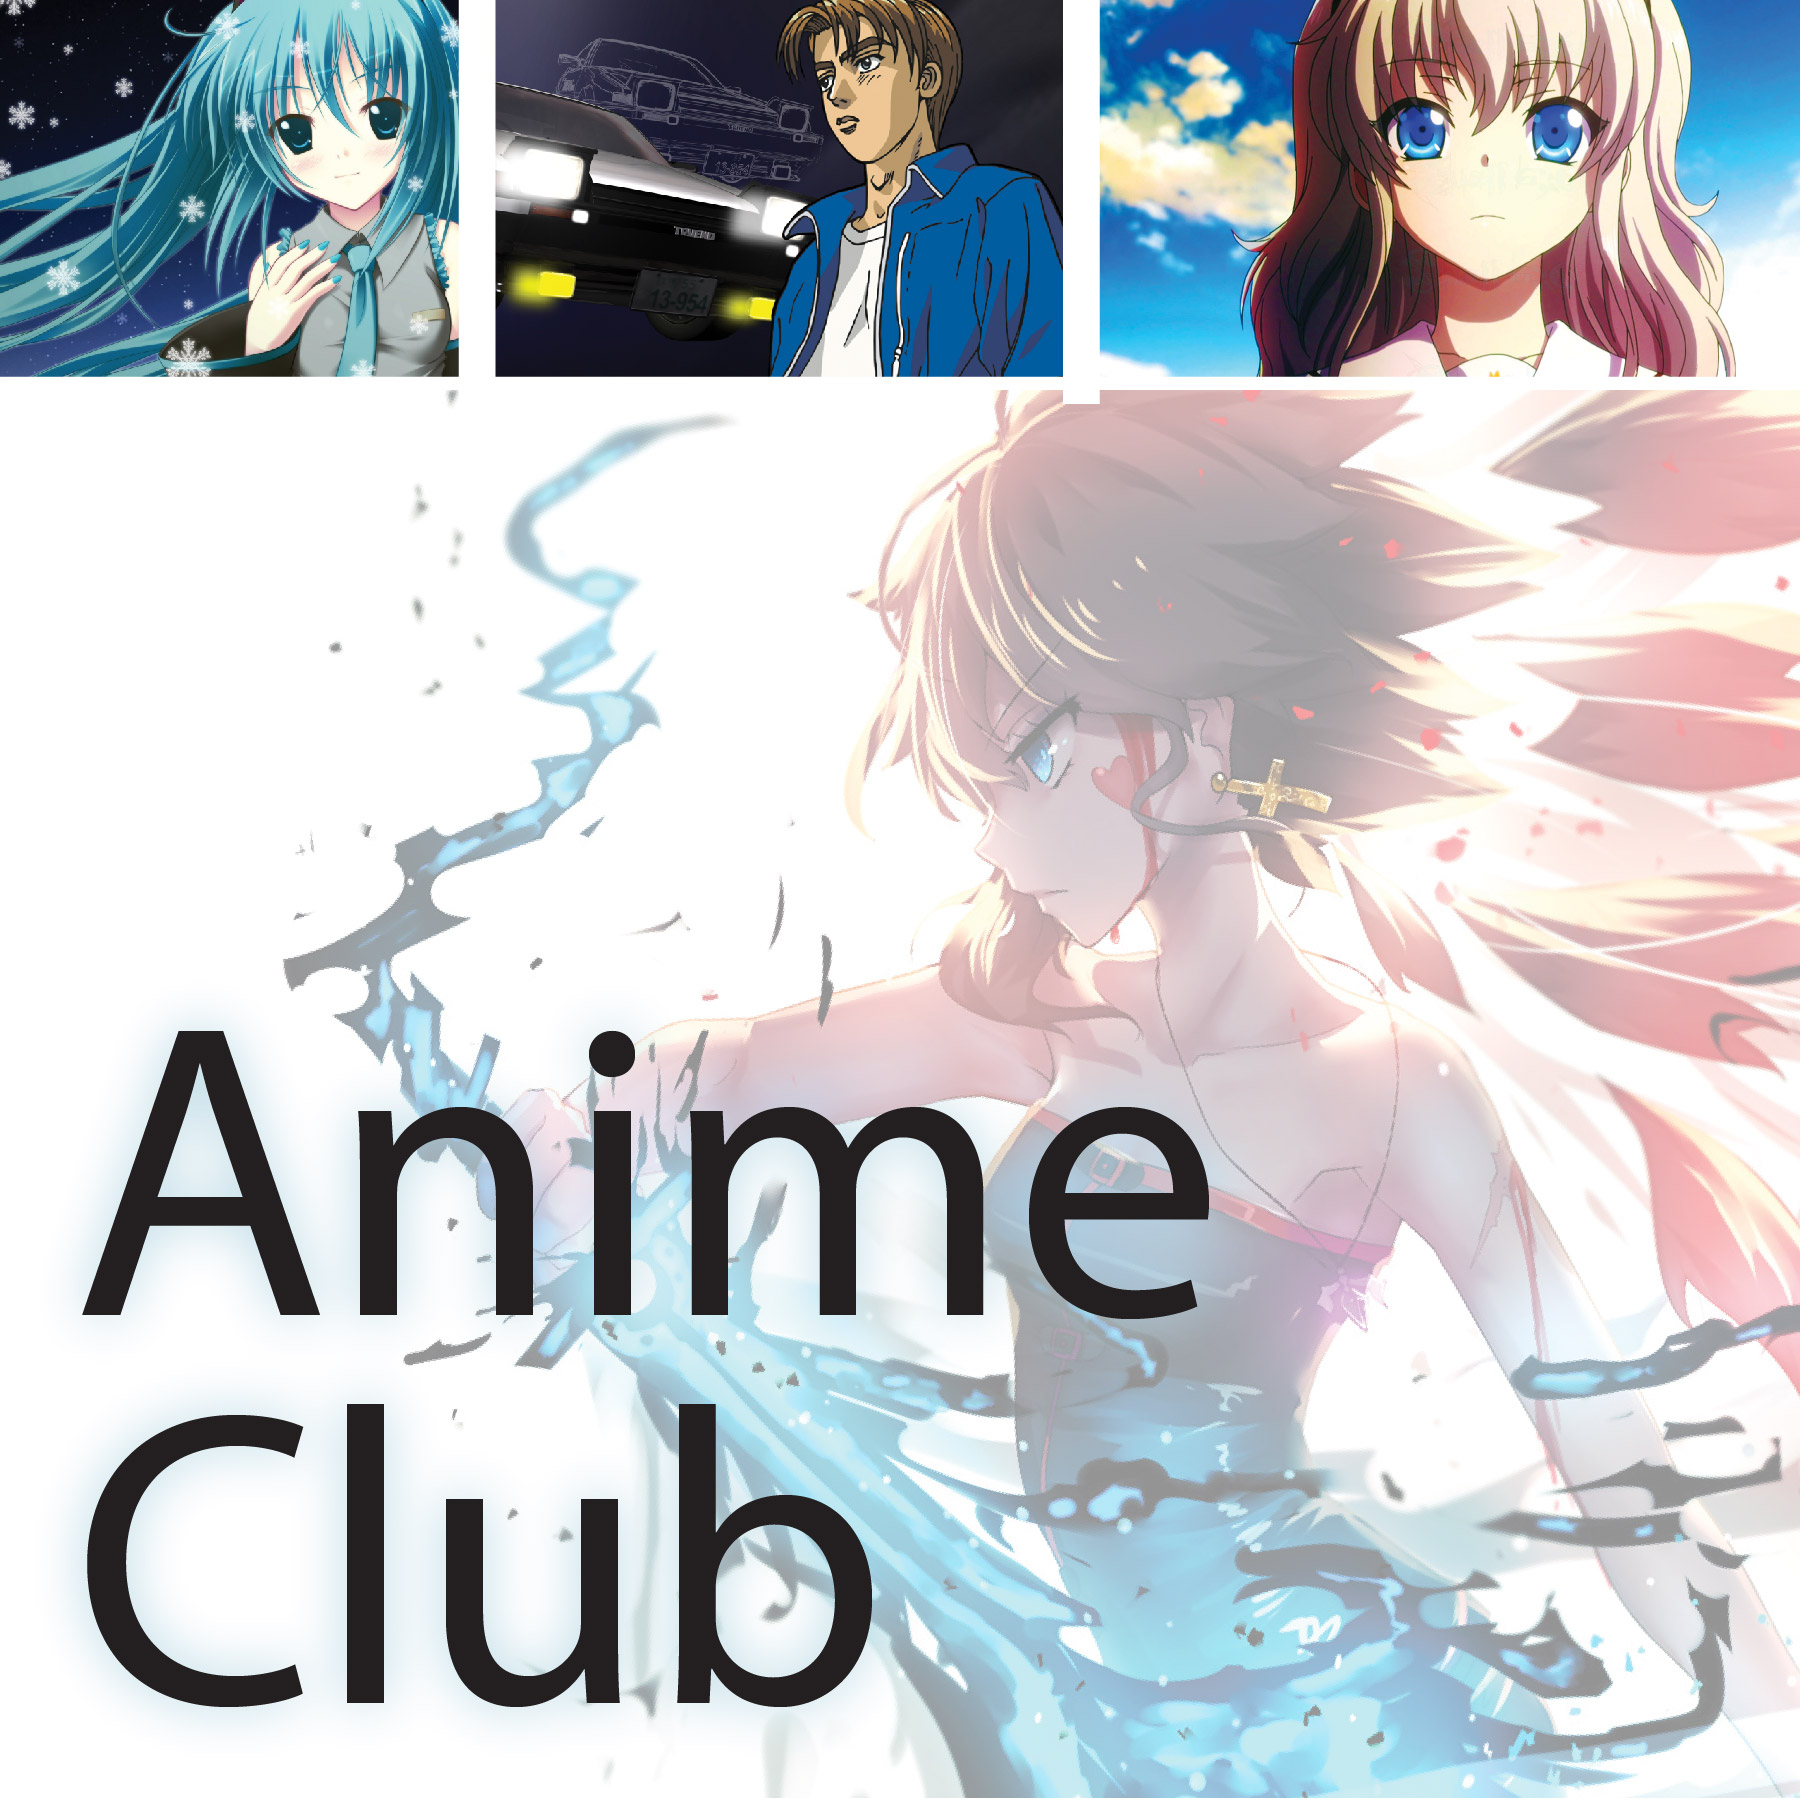 Various anime characters with the text "anime club"